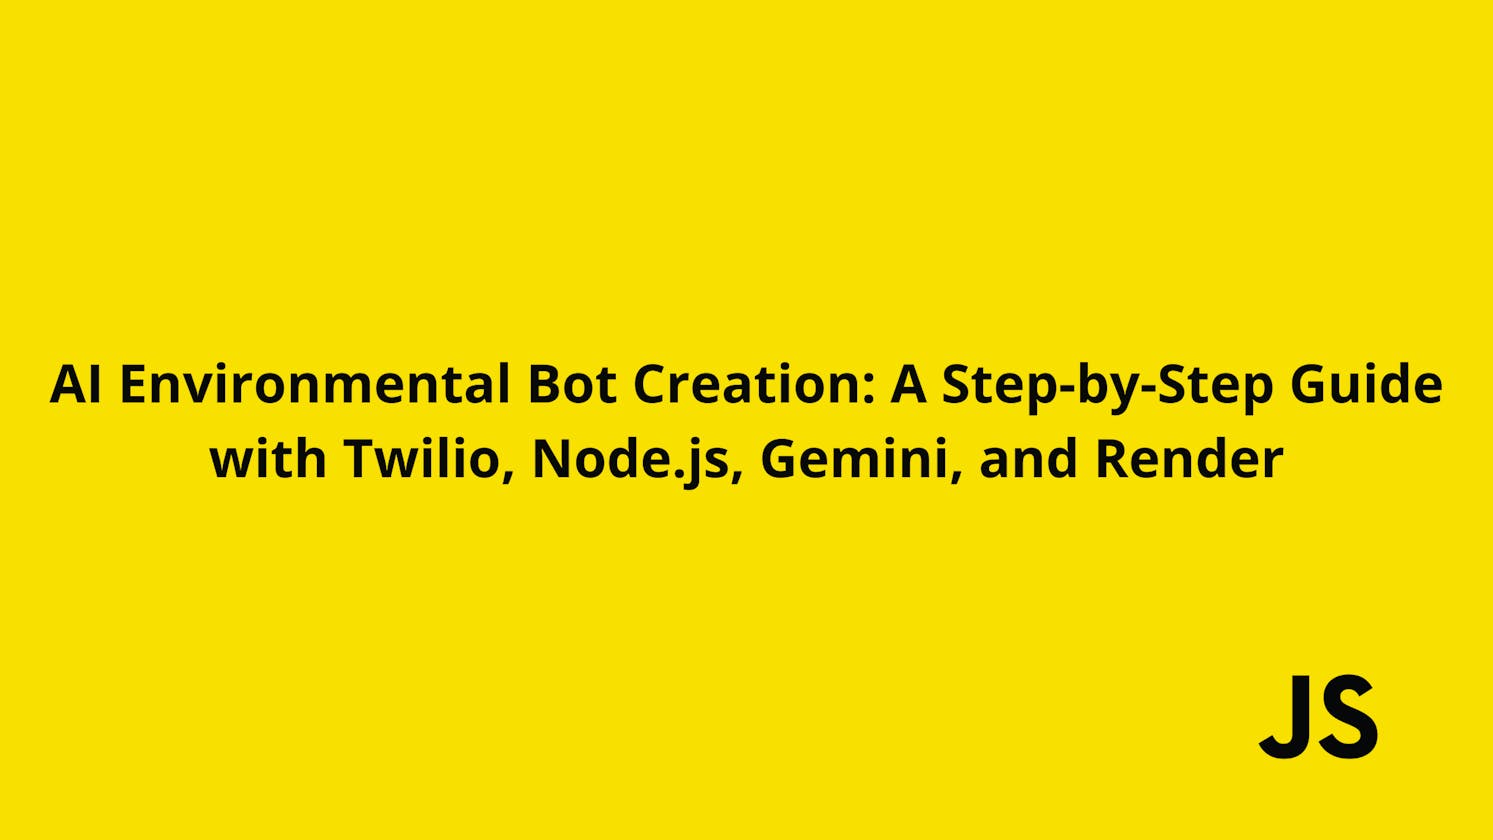 AI Environmental Bot Creation: A Step-by-Step Guide with Twilio, Node.js, Gemini, and Render